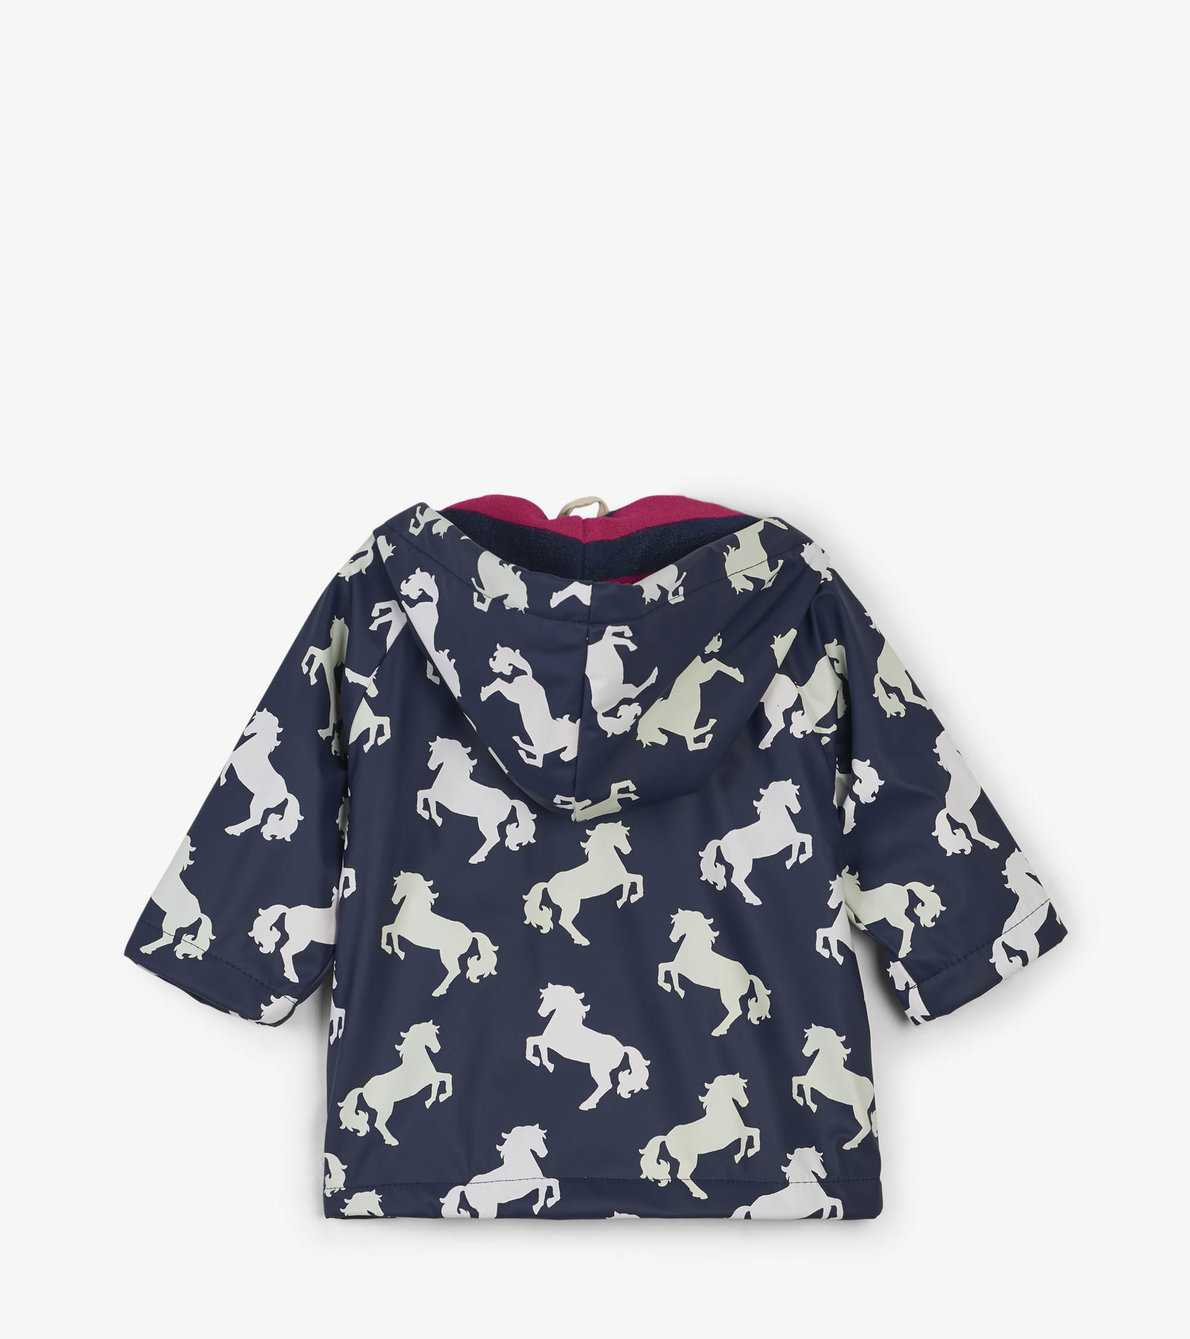 View larger image of Playful Horses Colour Changing Baby Raincoat